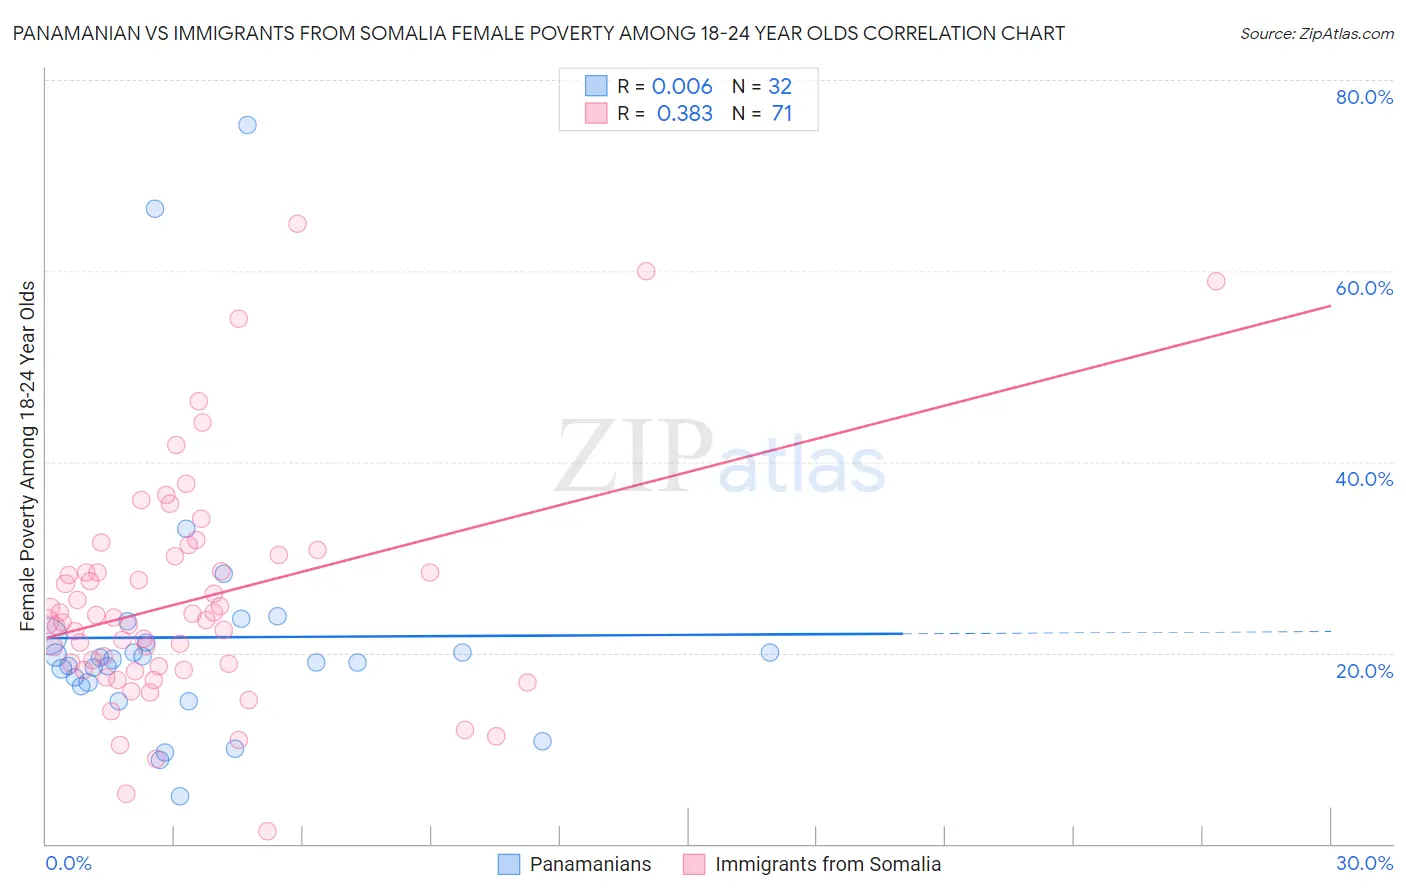 Panamanian vs Immigrants from Somalia Female Poverty Among 18-24 Year Olds